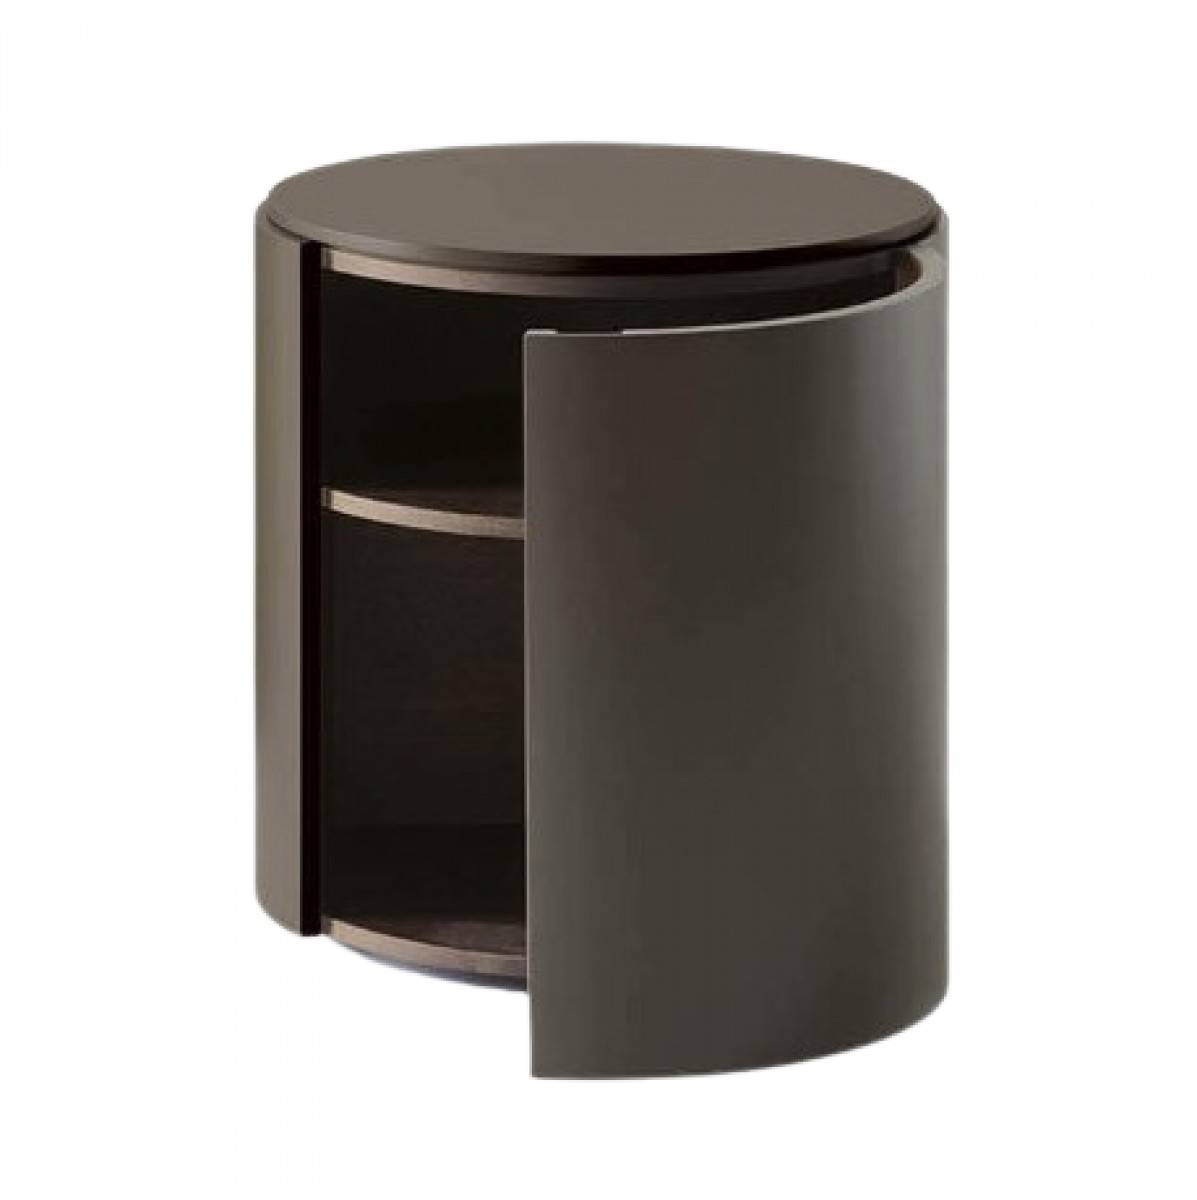 Top Bedside Table with 1 Door - Righthand Opening